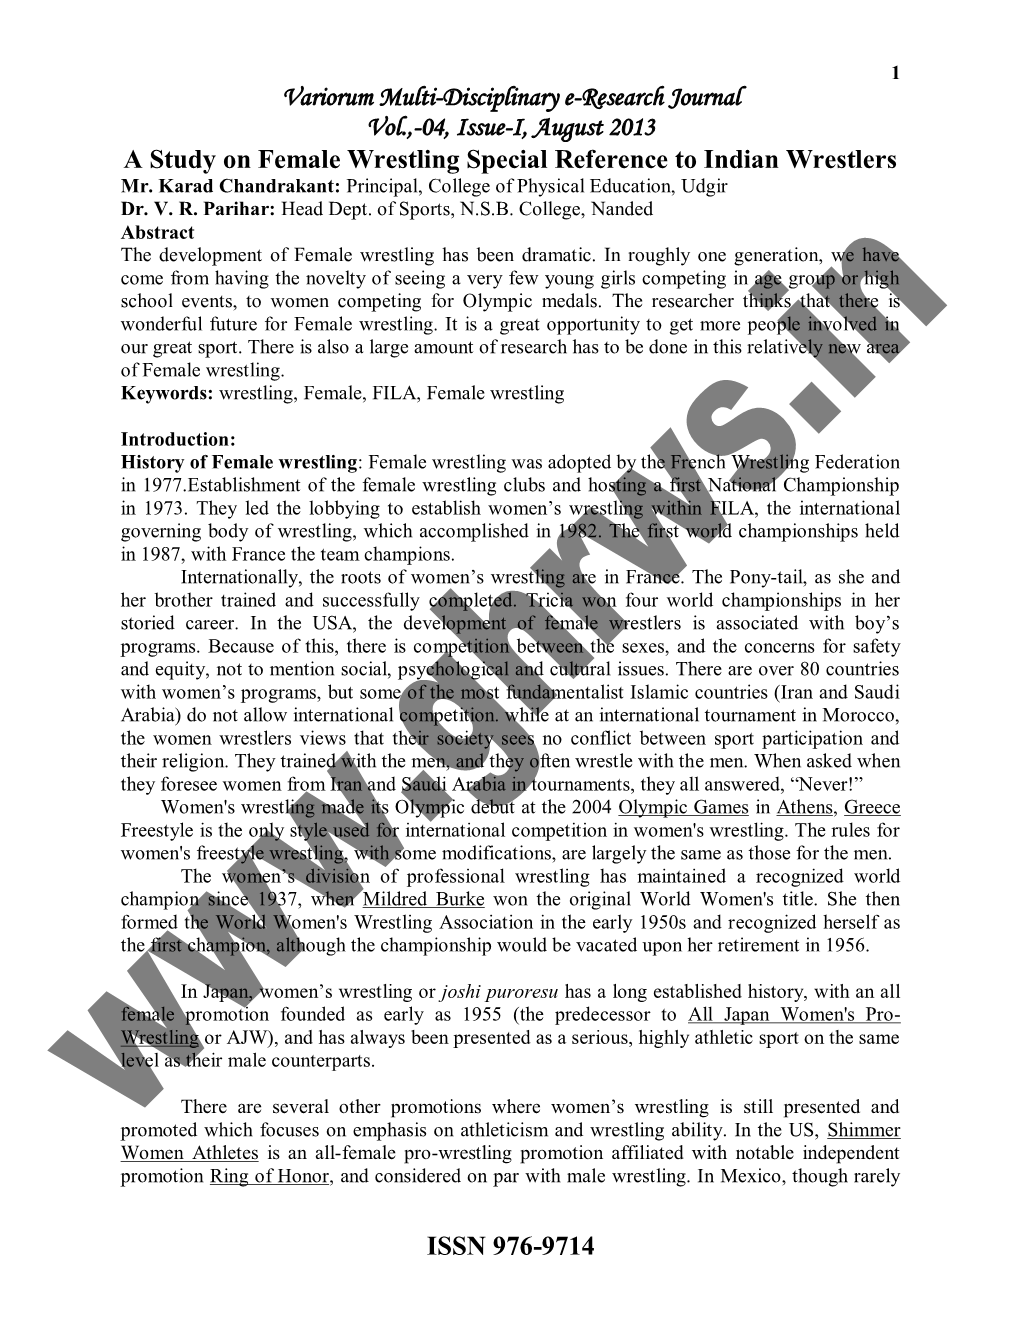 Variorum Multi-Disciplinary E-Research Journal Vol.,-04, Issue-I, August 2013 a Study on Female Wrestling Special Reference to Indian Wrestlers Mr